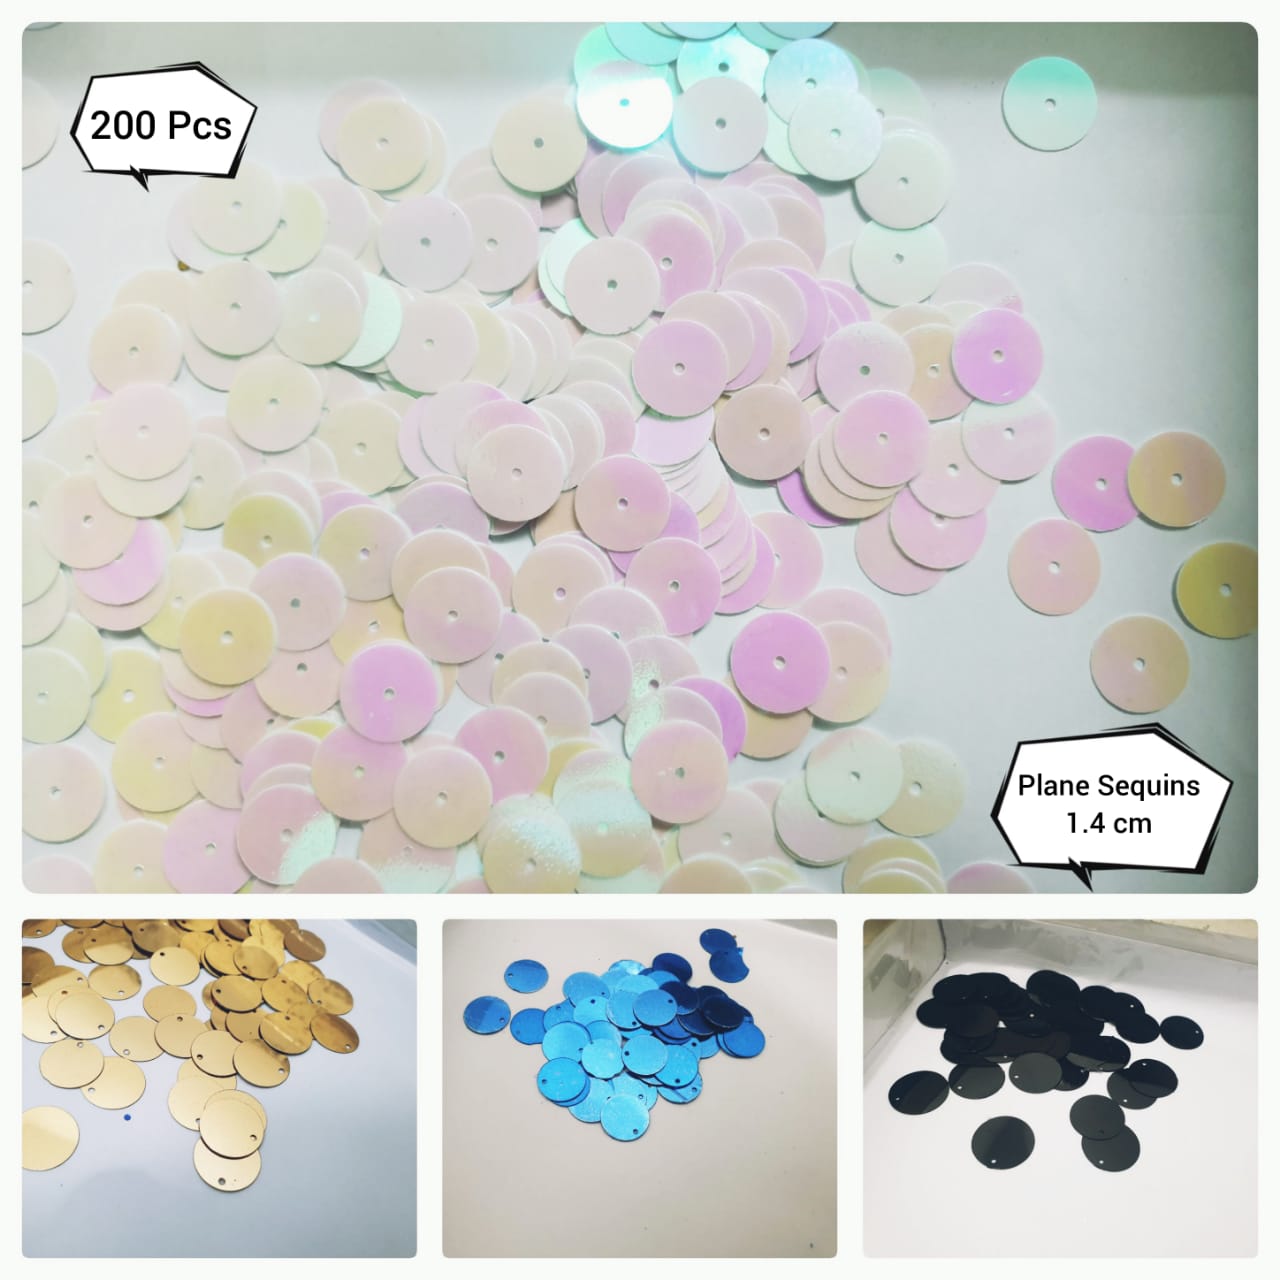 200 Pcs Plane Round Sitaray In Blue, Black, Gold And White Color , Loose Sequins Craft Supplies